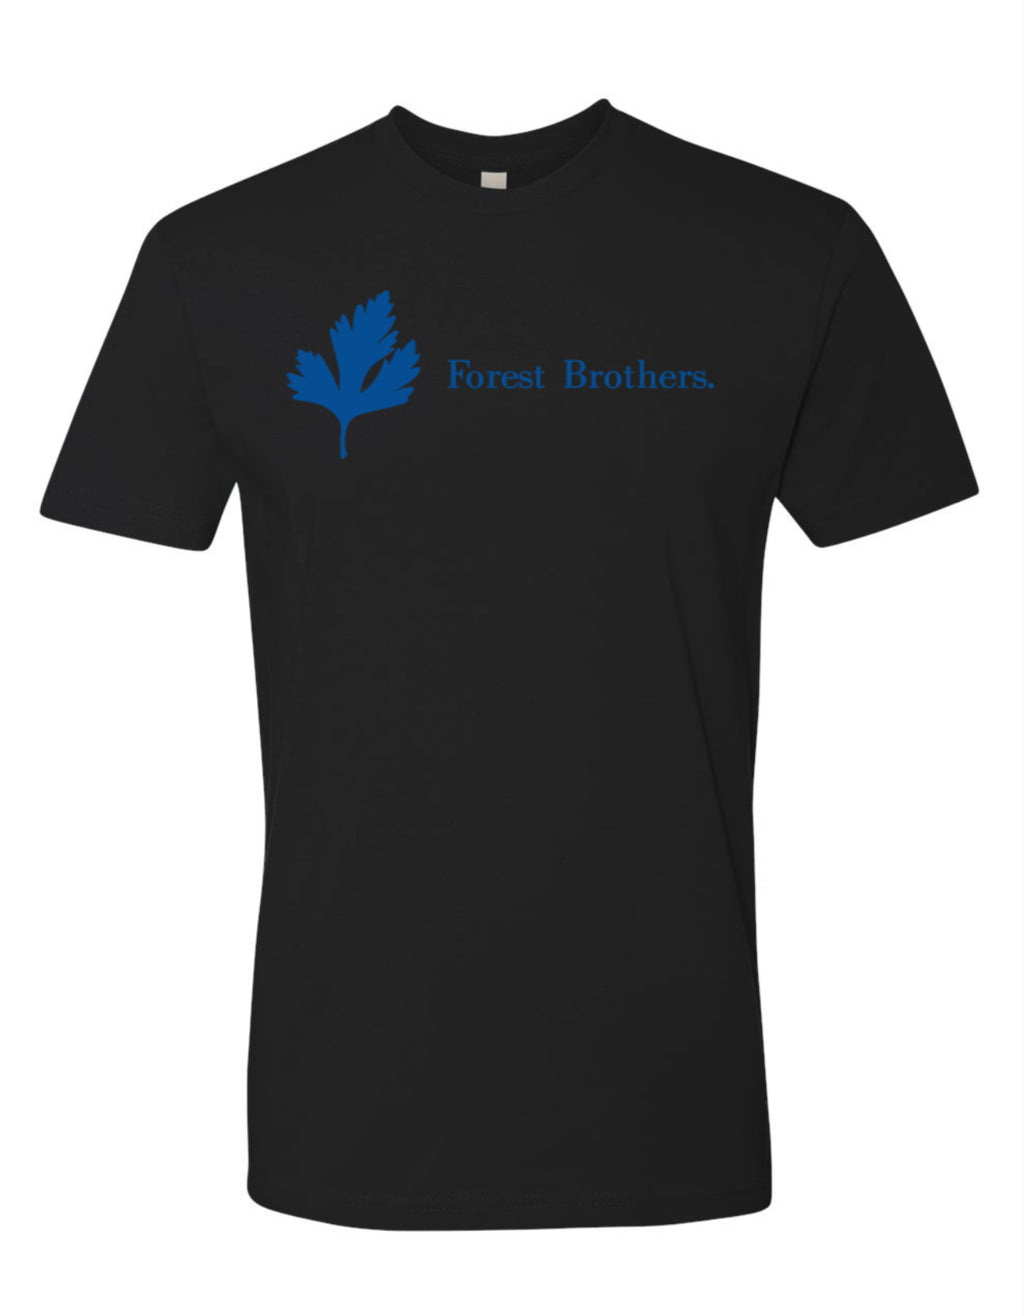 BLUE(BLACK) FOREST BROTHERS T-SHIRT